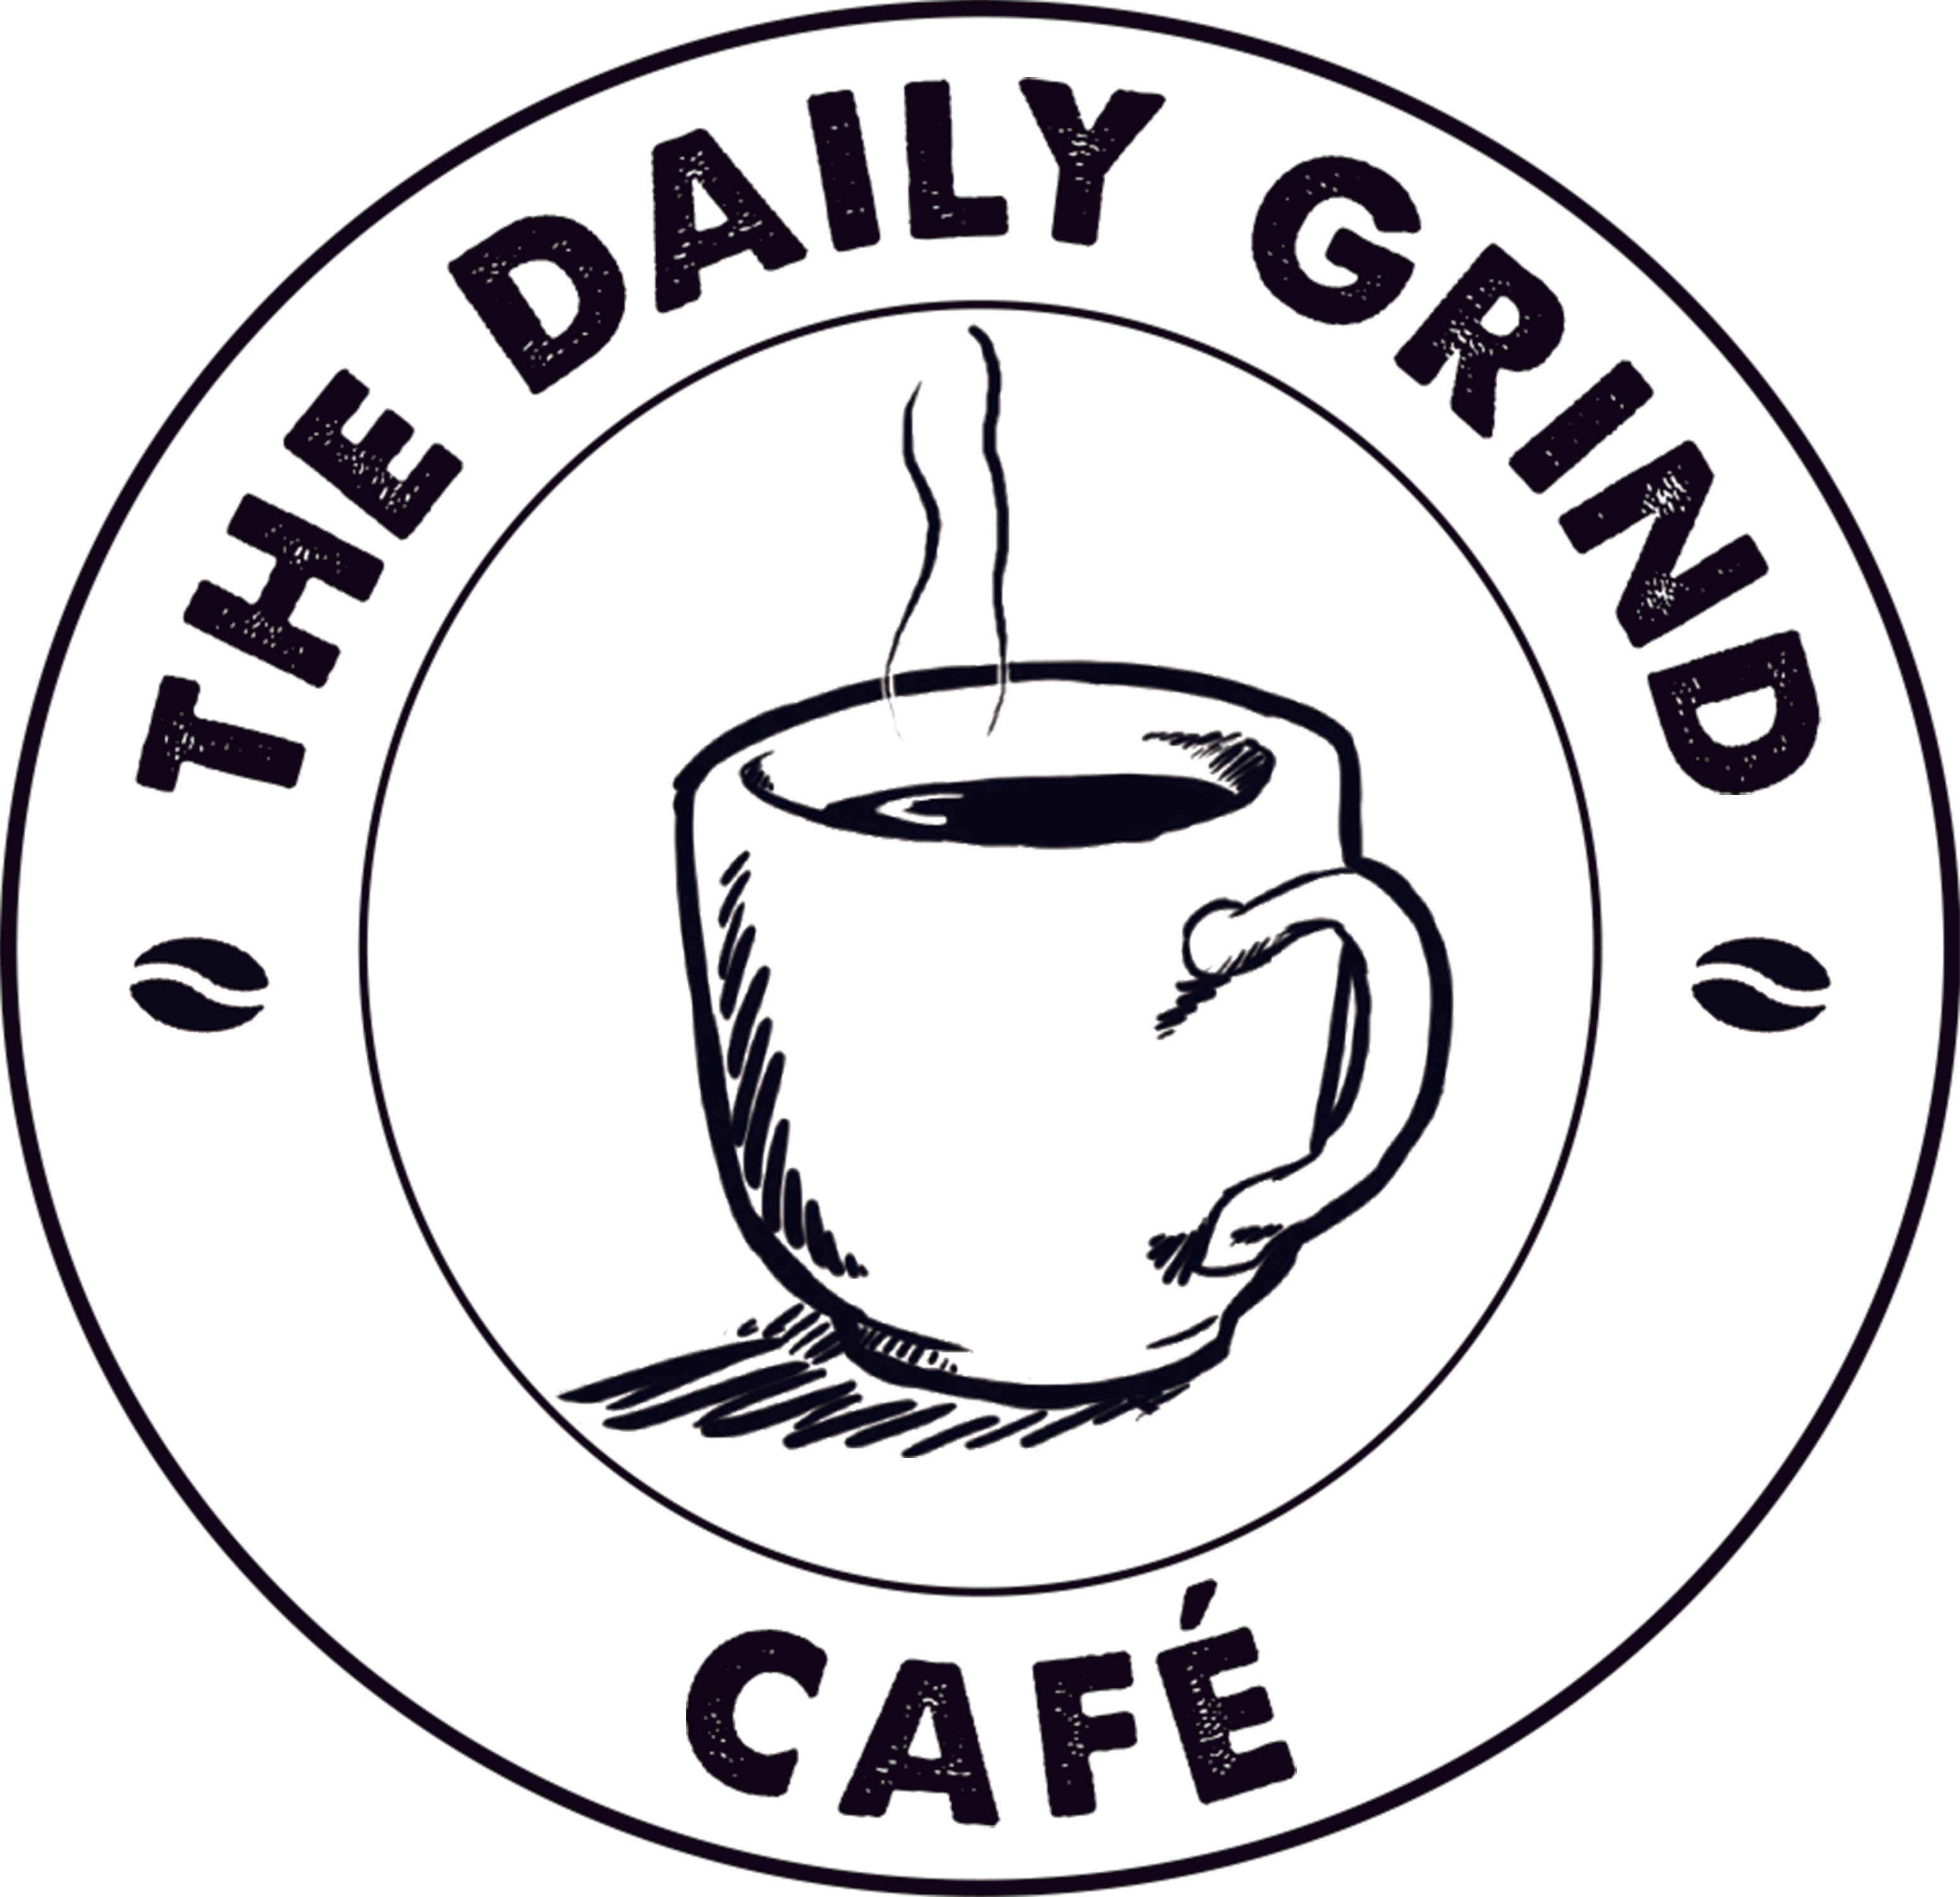 Daily Grind Coffee Shop : The Daily Grind How To Open Run A Coffee Shop ...